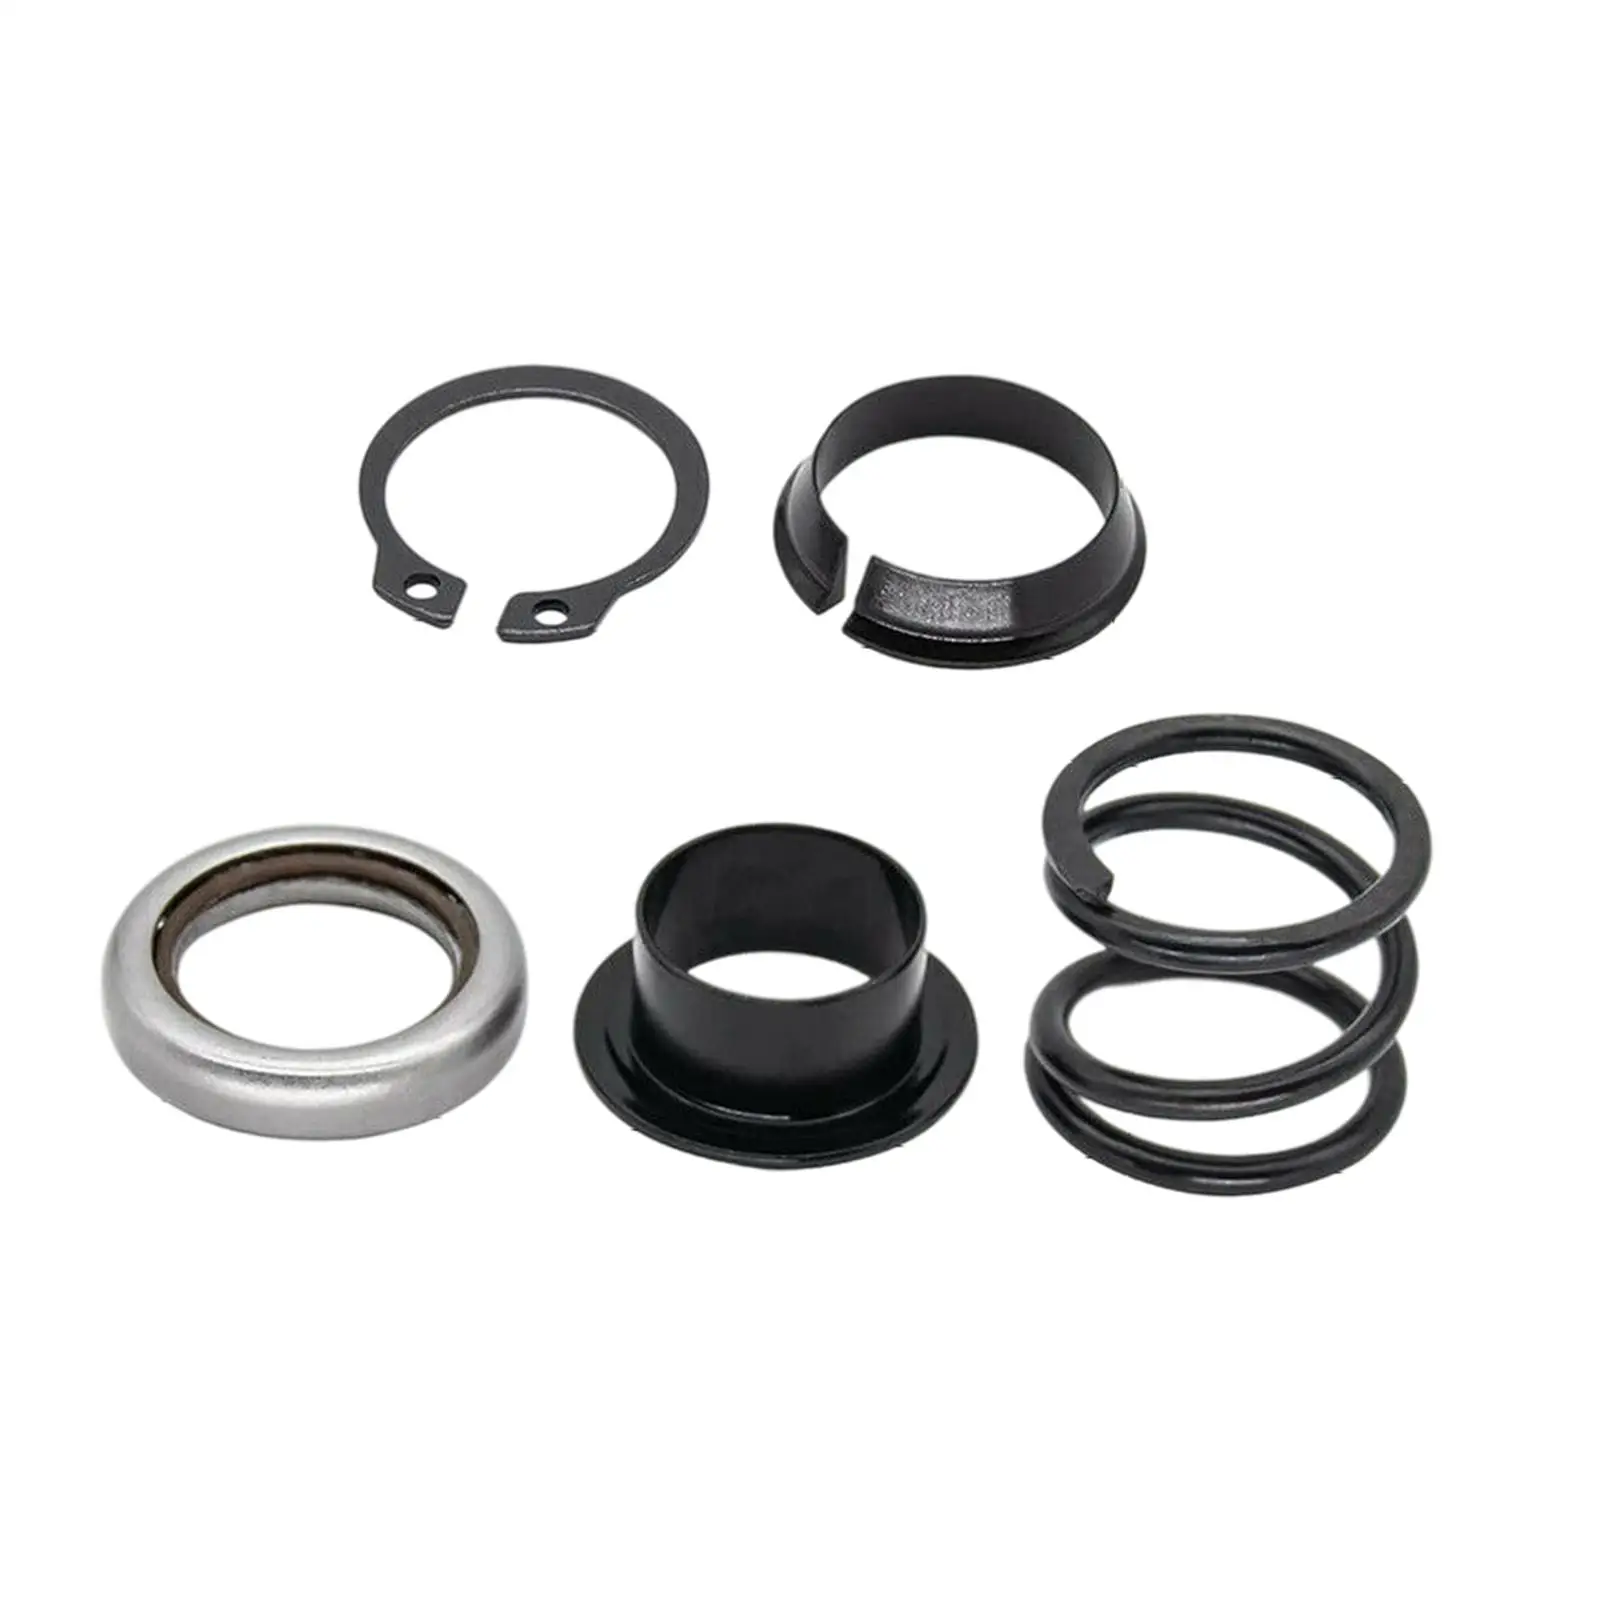 Steering Column Upper Bearing Kit, Moulding Replacement ,Metal ,Accessories Fit for   for  199 F4Dz-3517-A ,Car Supplies